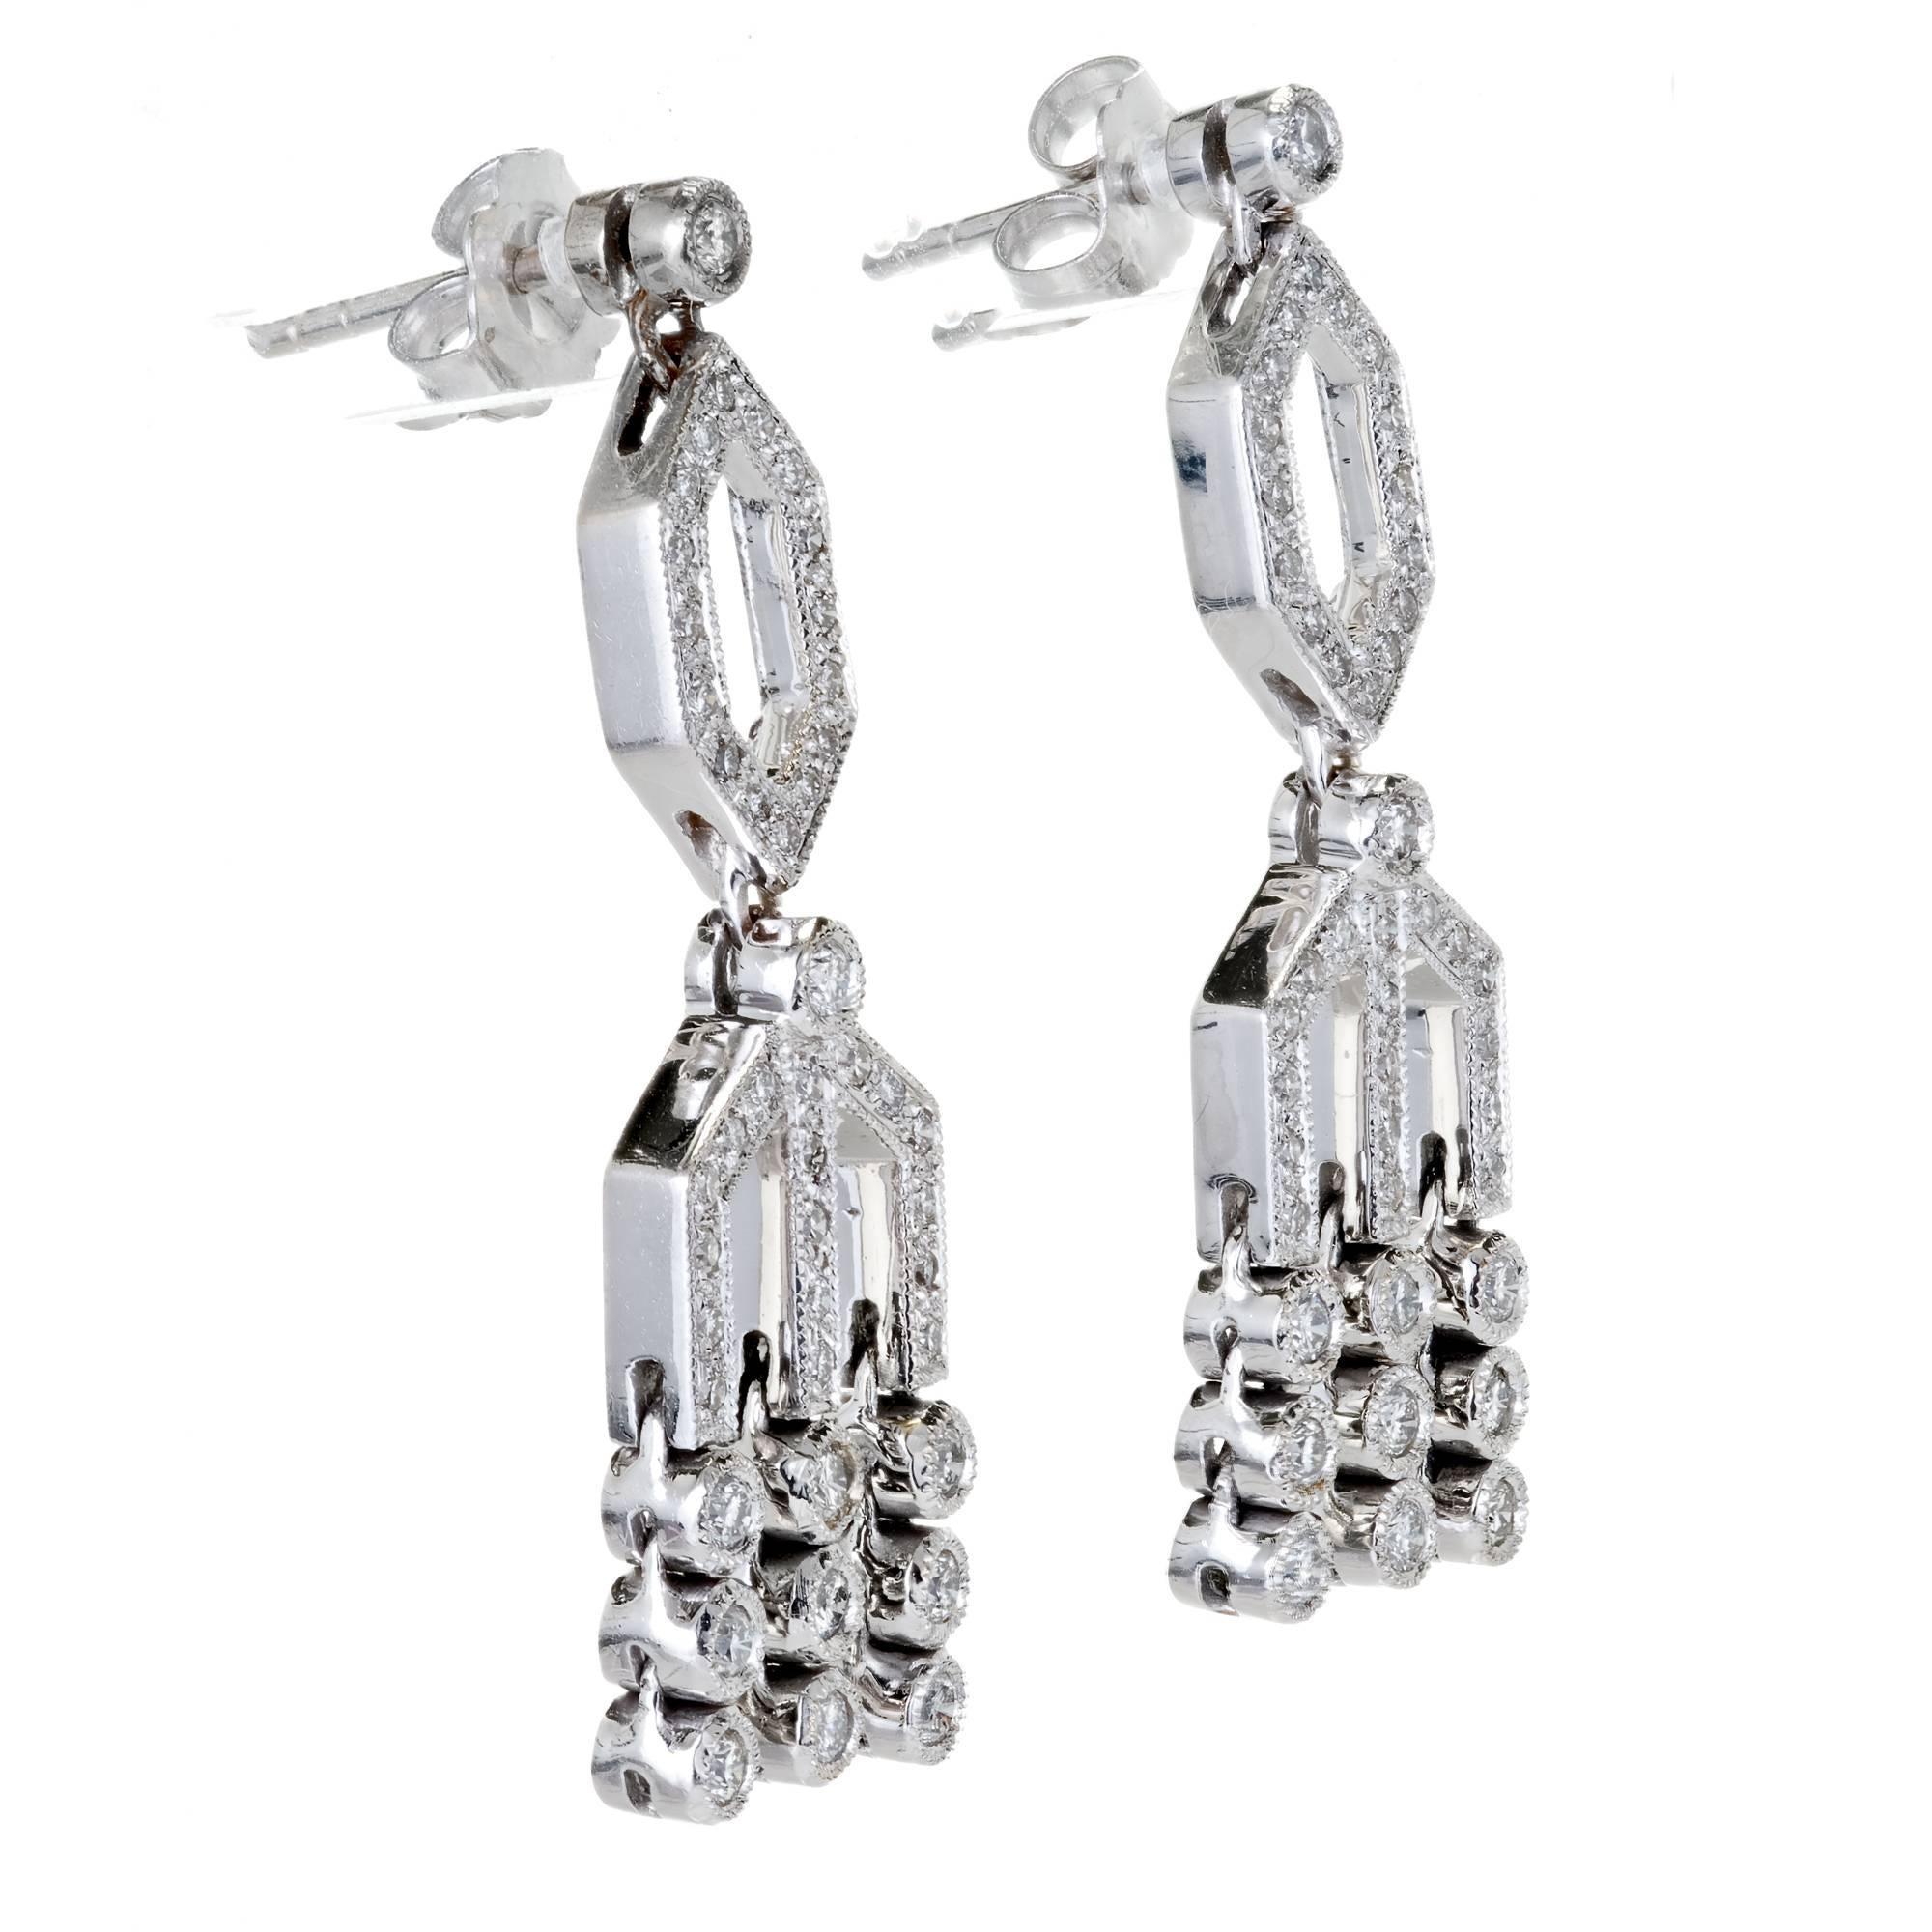 Geometric dangle diamond earrings in 18k white gold.  circa 1950-1960. 

18k White gold
88 full cut diamonds, approx. total weight 1.00cts, H, VS-SI
Top to bottom: 34.78mm or 1.37 inches
Width: 10.5mm or .41 inch
Depth: 3mm
7.6 grams
Tested: